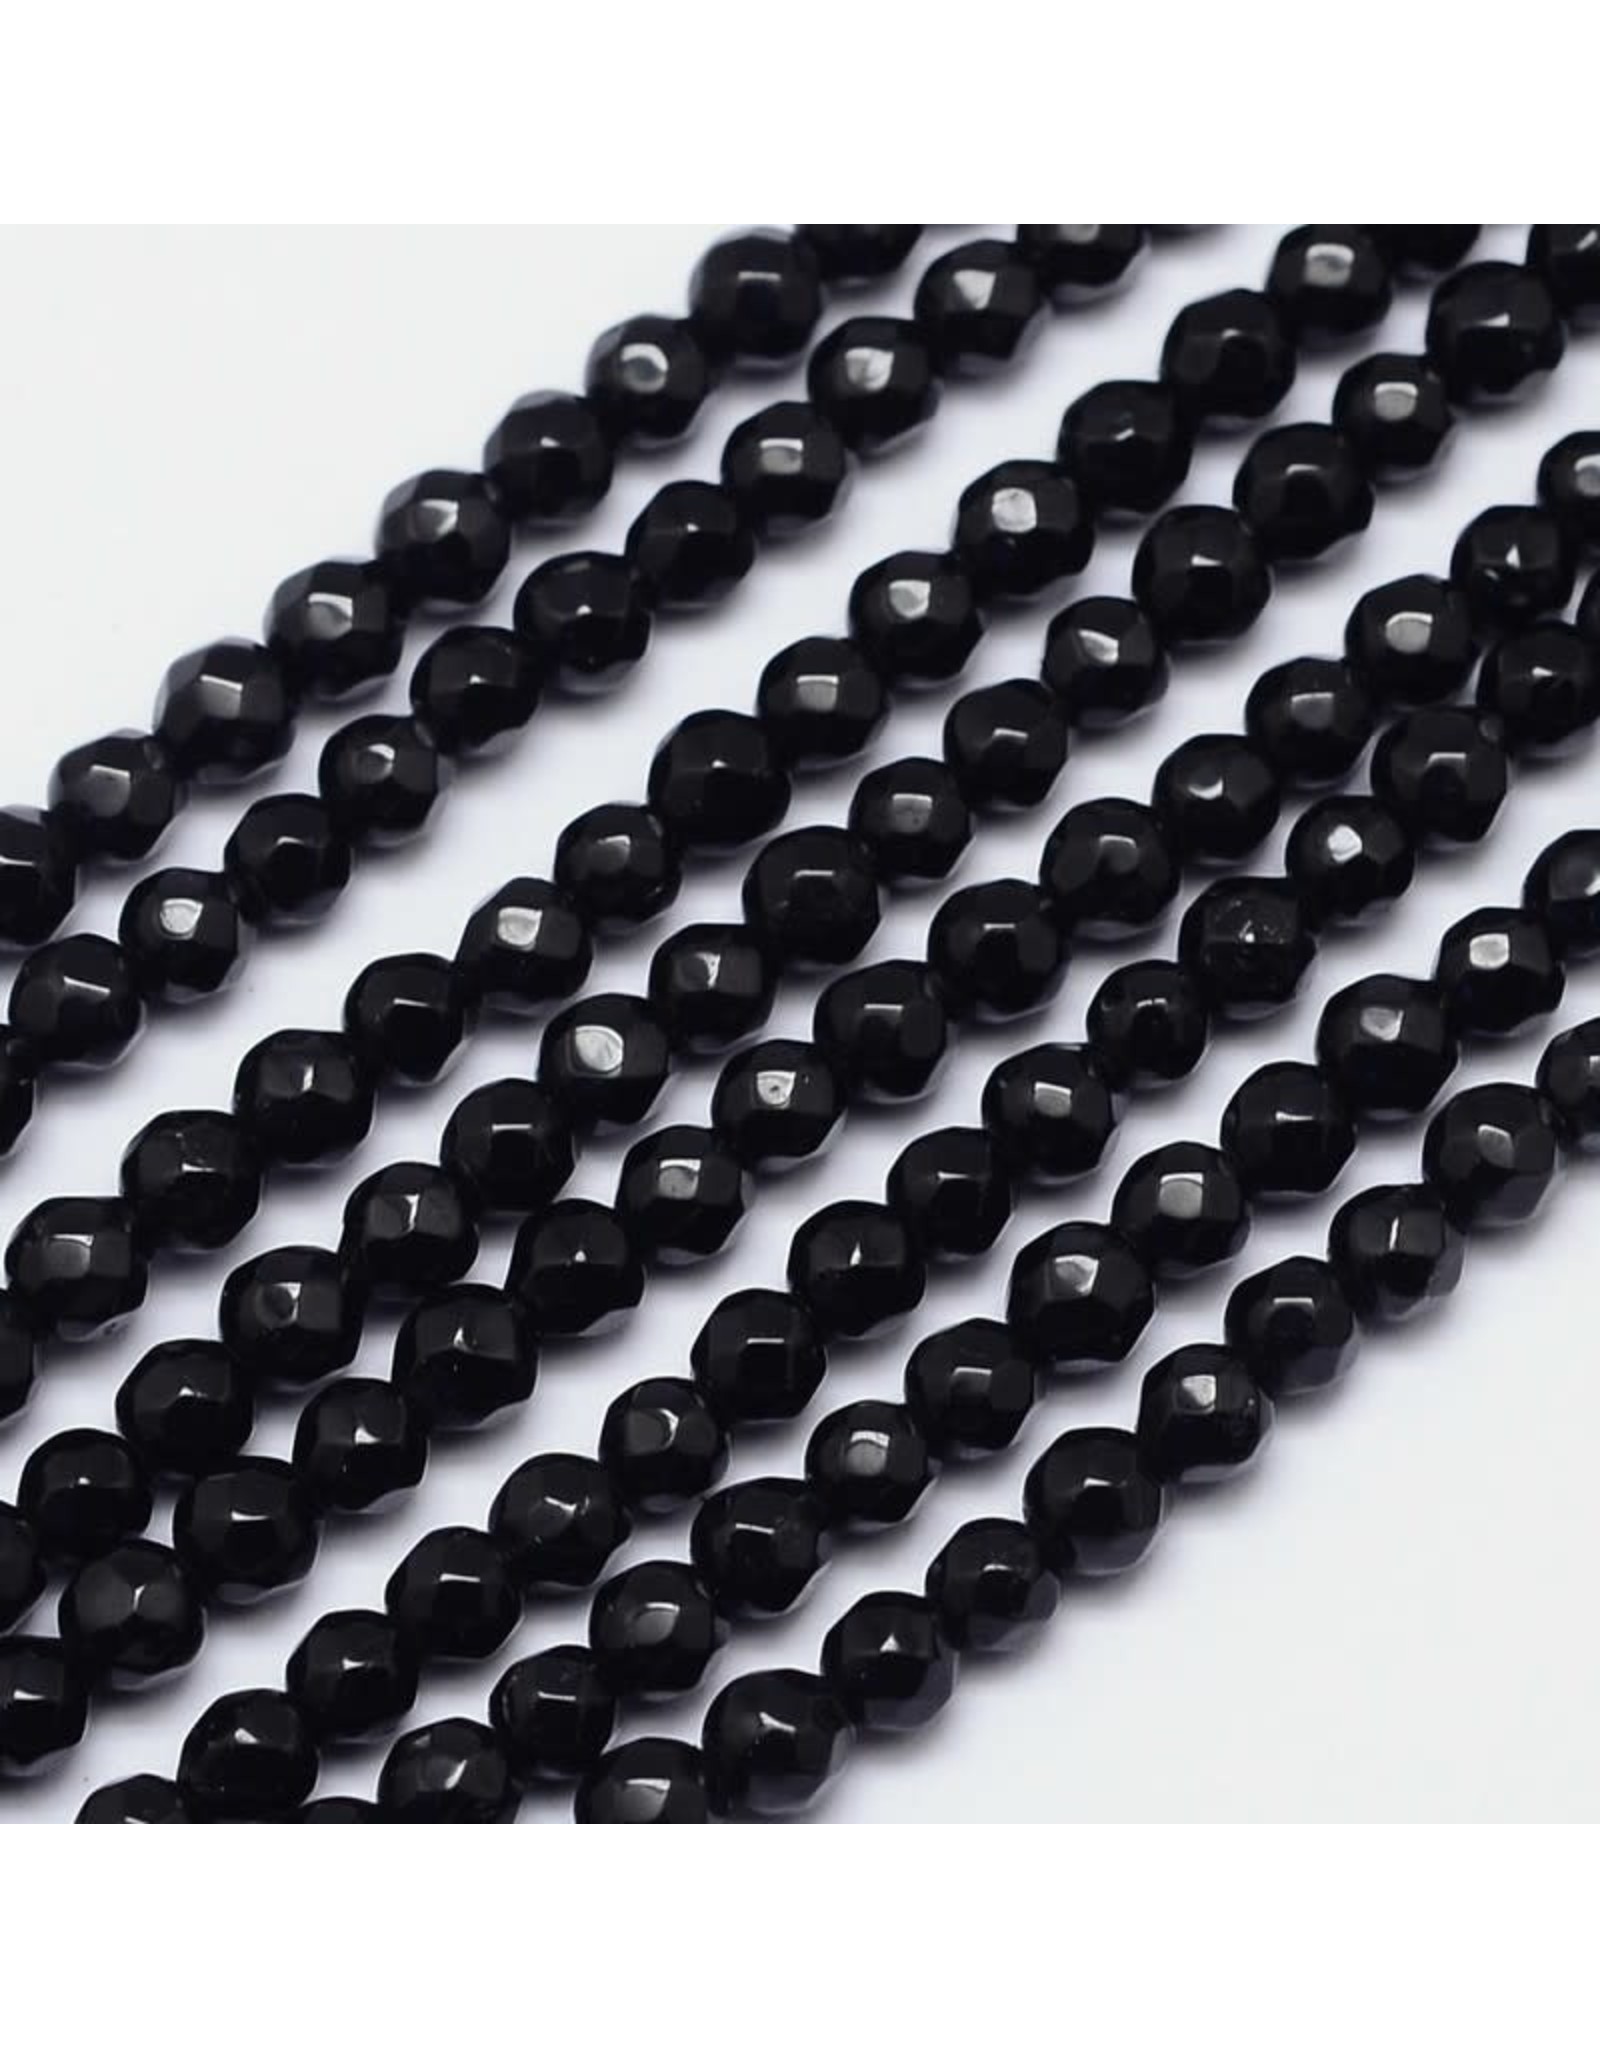 Black Tourmaline  Faceted 4mm  Grade AB+ 15” Strand  approx  x90 Beads